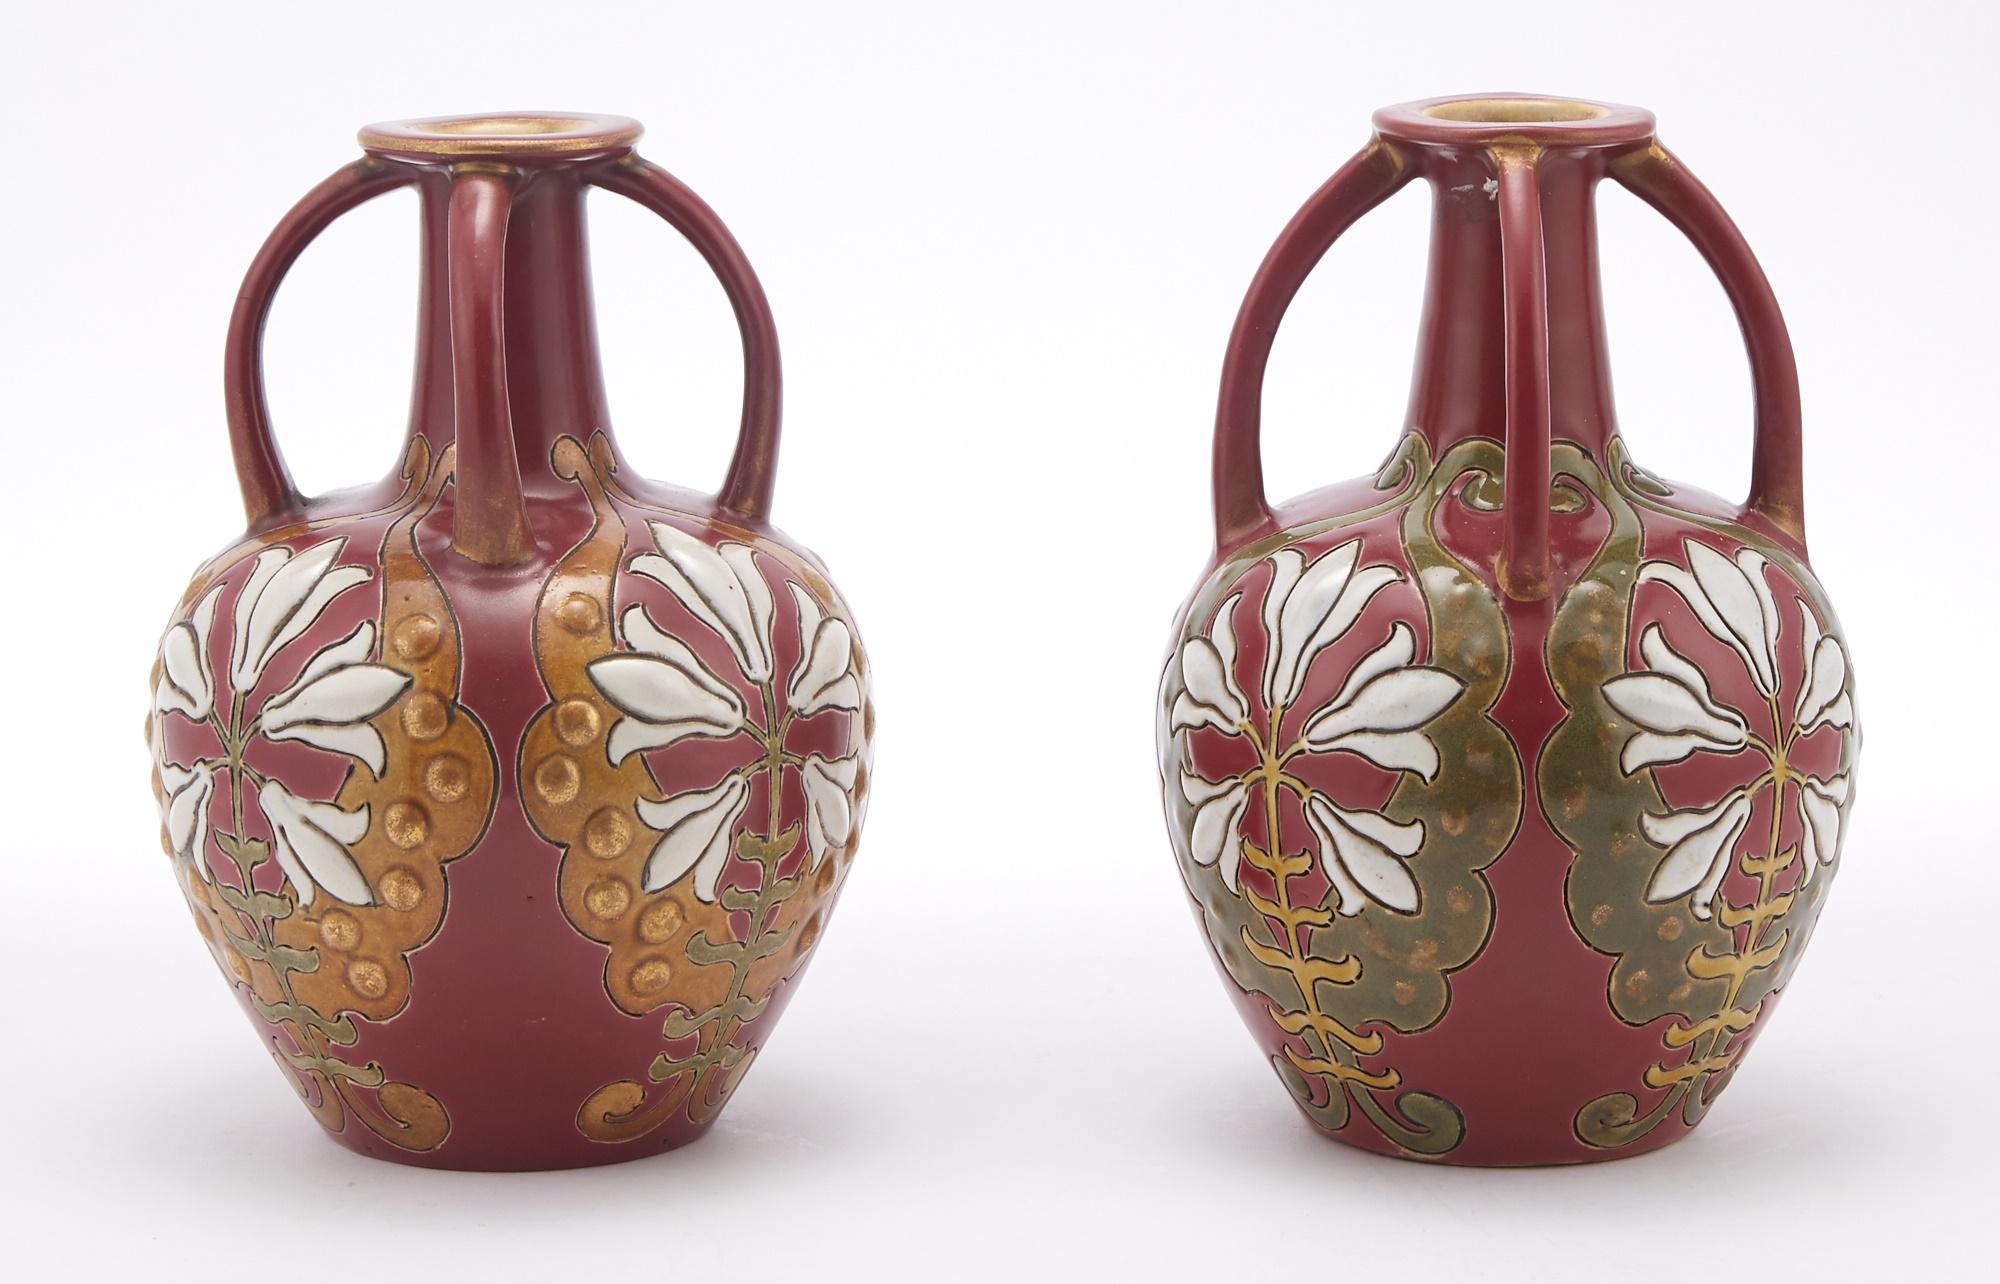 Glazed Mid 20th century Hand-Painted / decorated Pair Decorative Vases For Sale